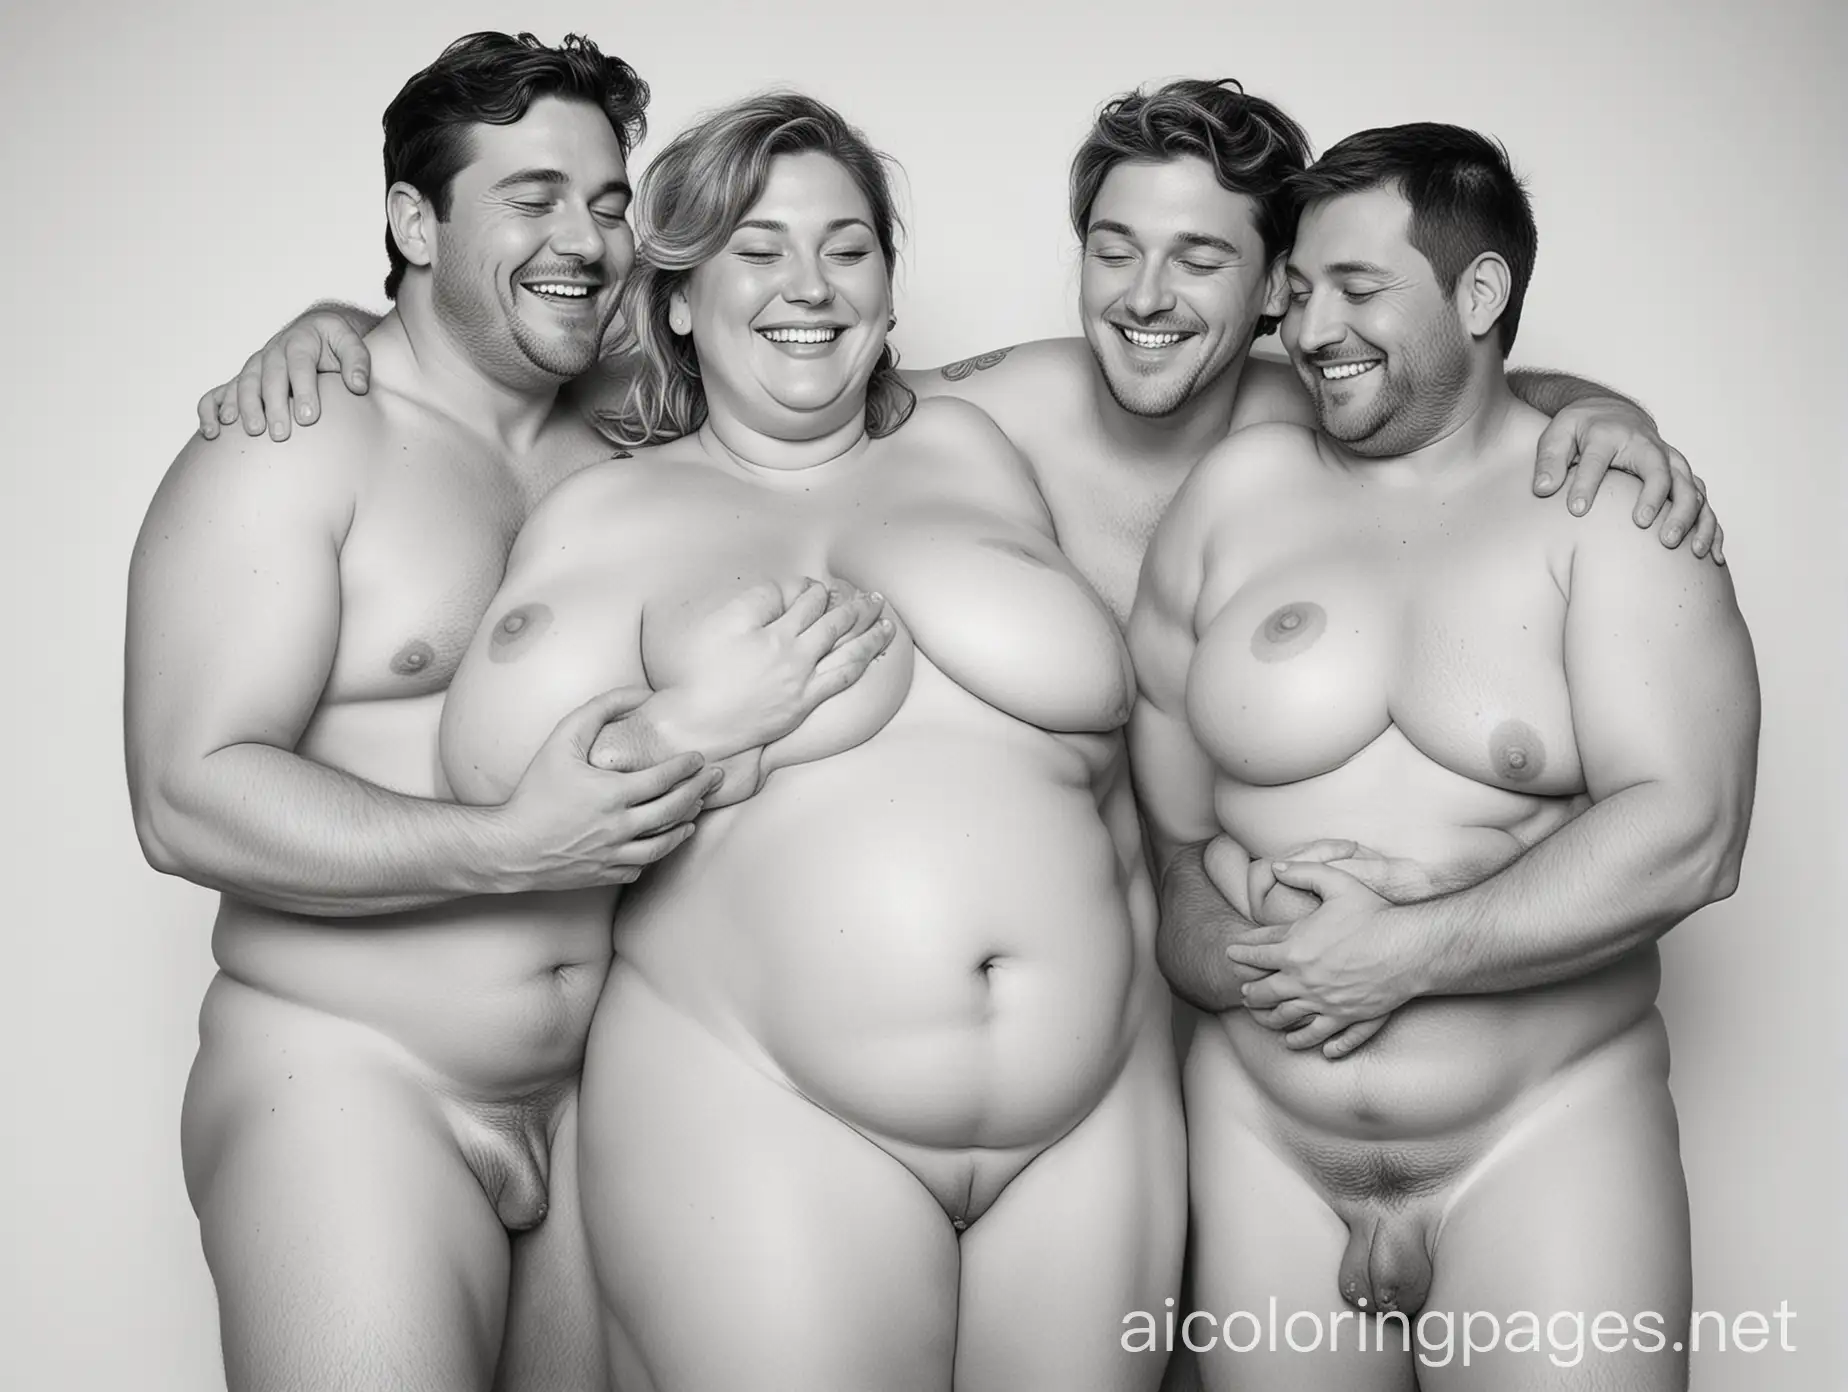 Naked fat woman cuddles with two men, all smiles, Coloring Page, black and white, line art, white background, Simplicity, Ample White Space. The background of the coloring page is plain white to make it easy for young children to color within the lines. The outlines of all the subjects are easy to distinguish, making it simple for kids to color without too much difficulty